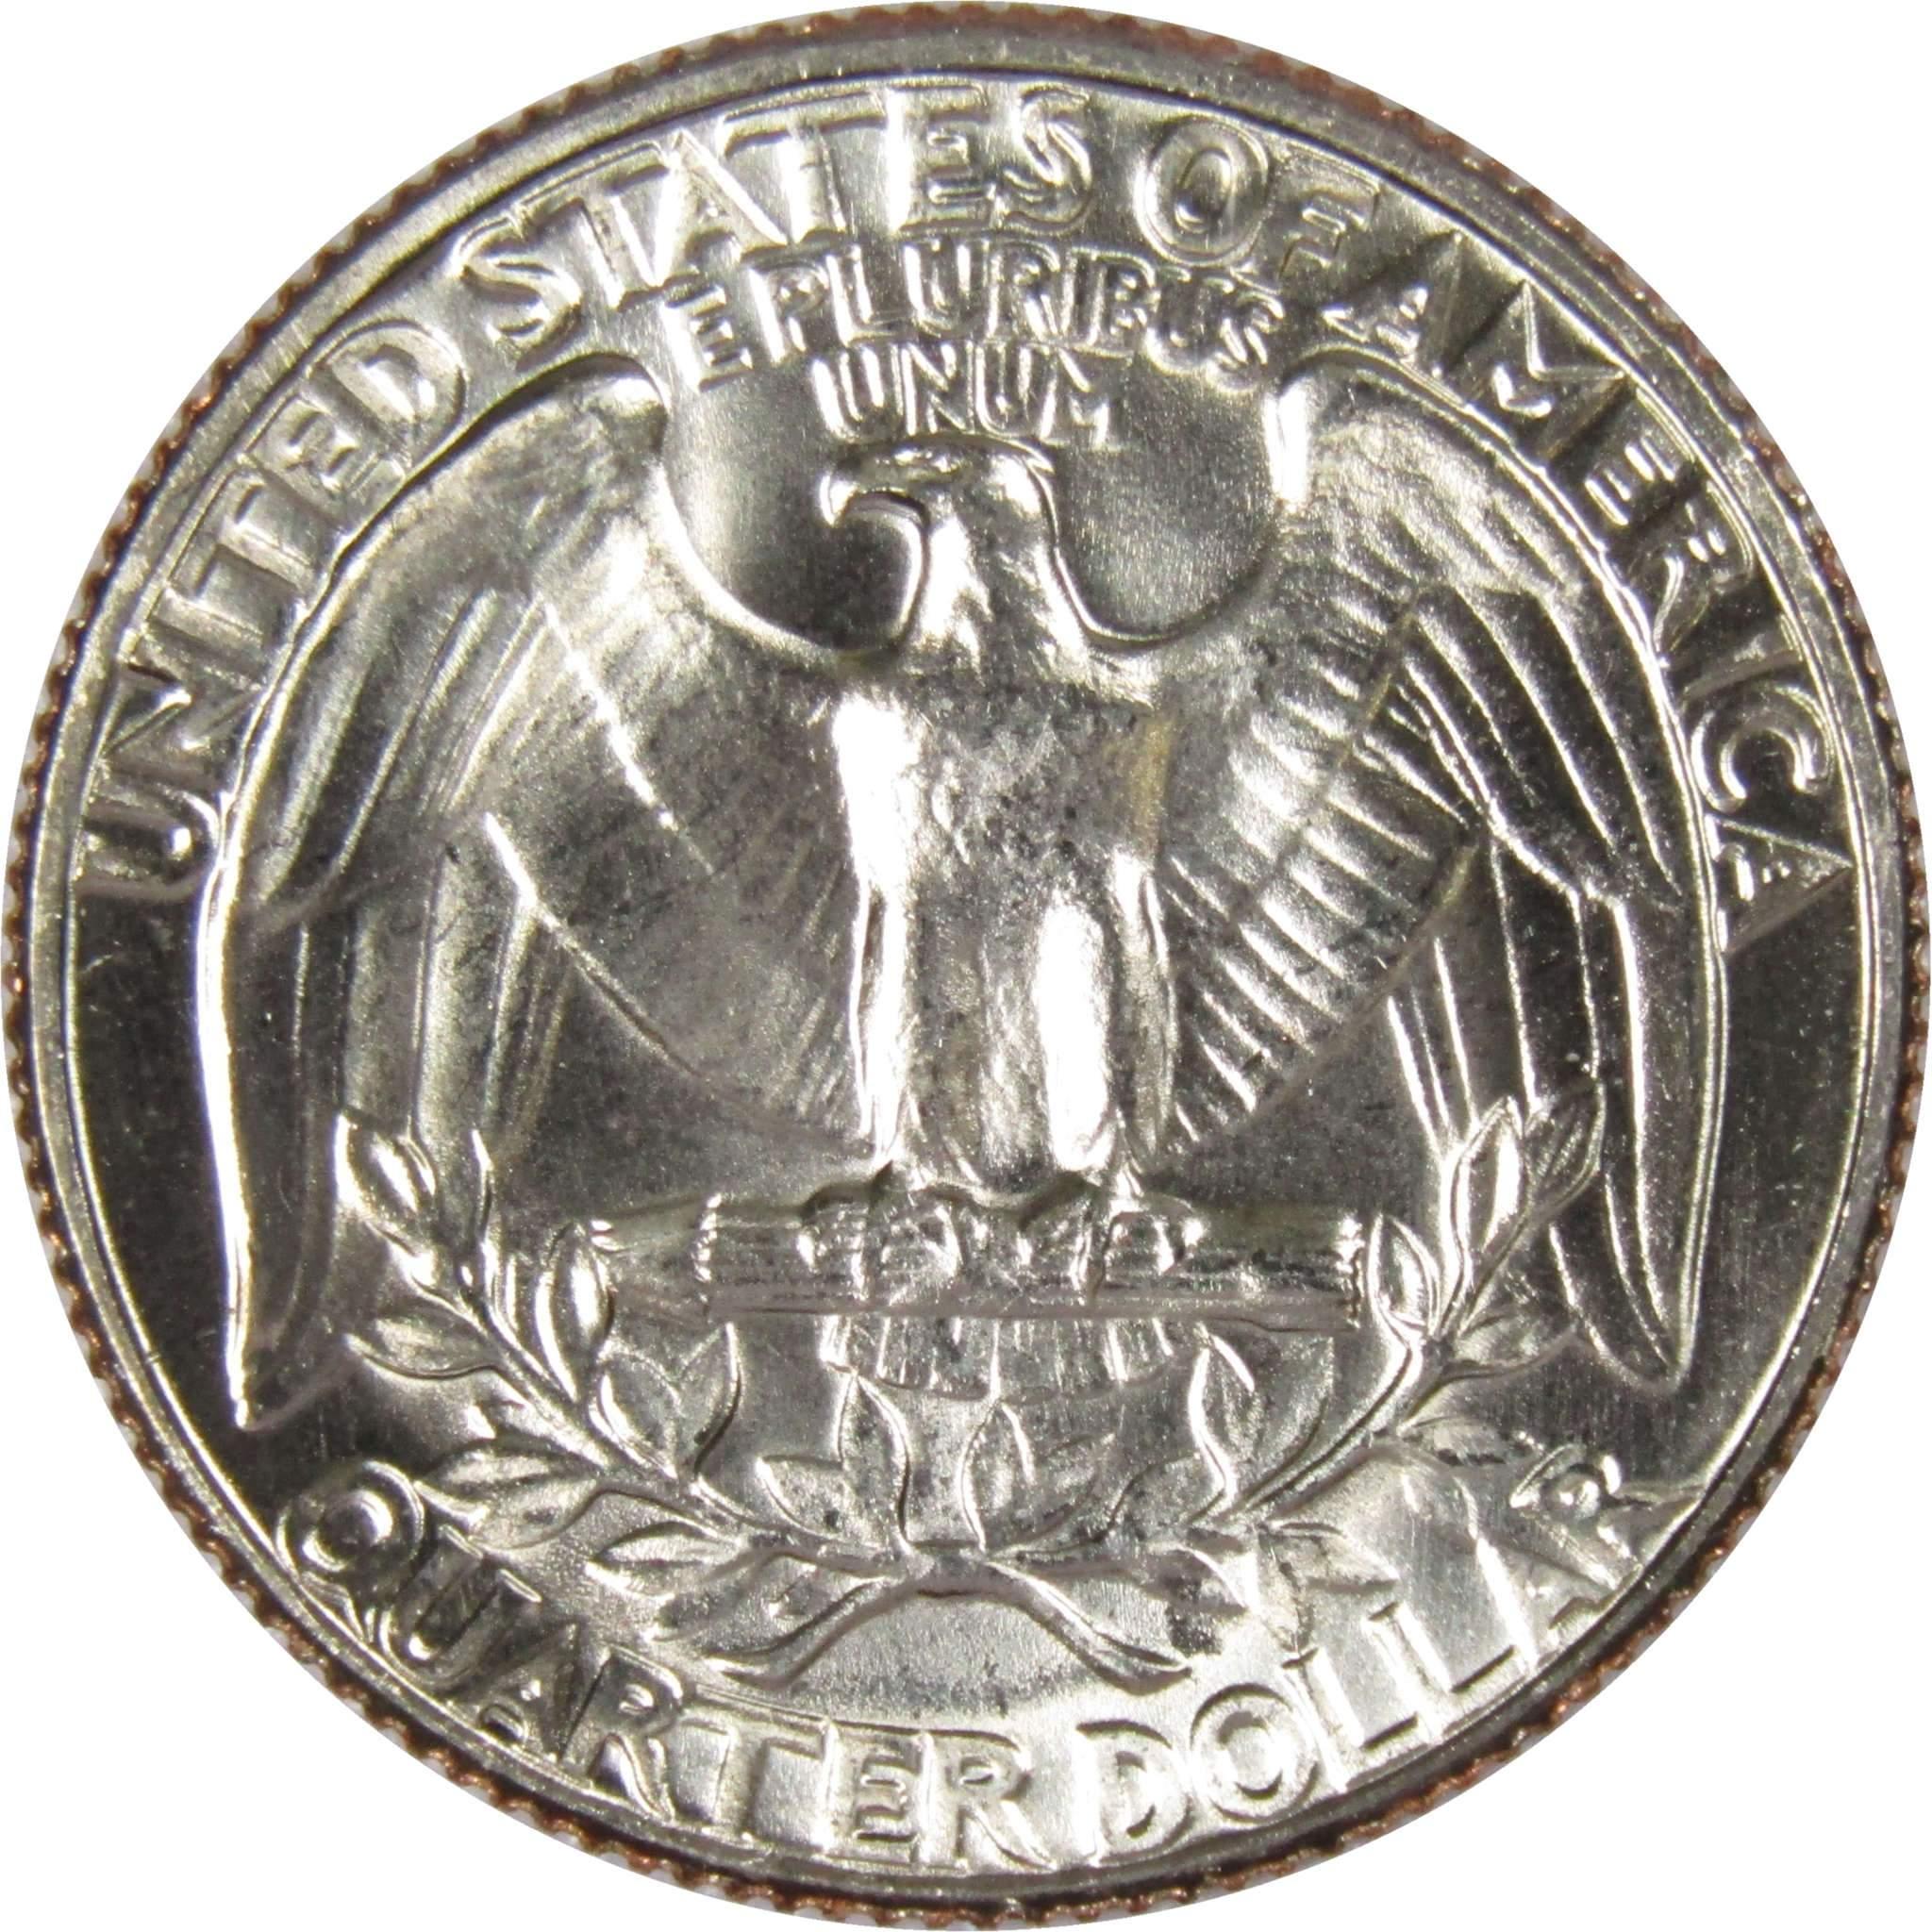 1968 D Washington Quarter BU Uncirculated Mint State 25c US Coin Collectible